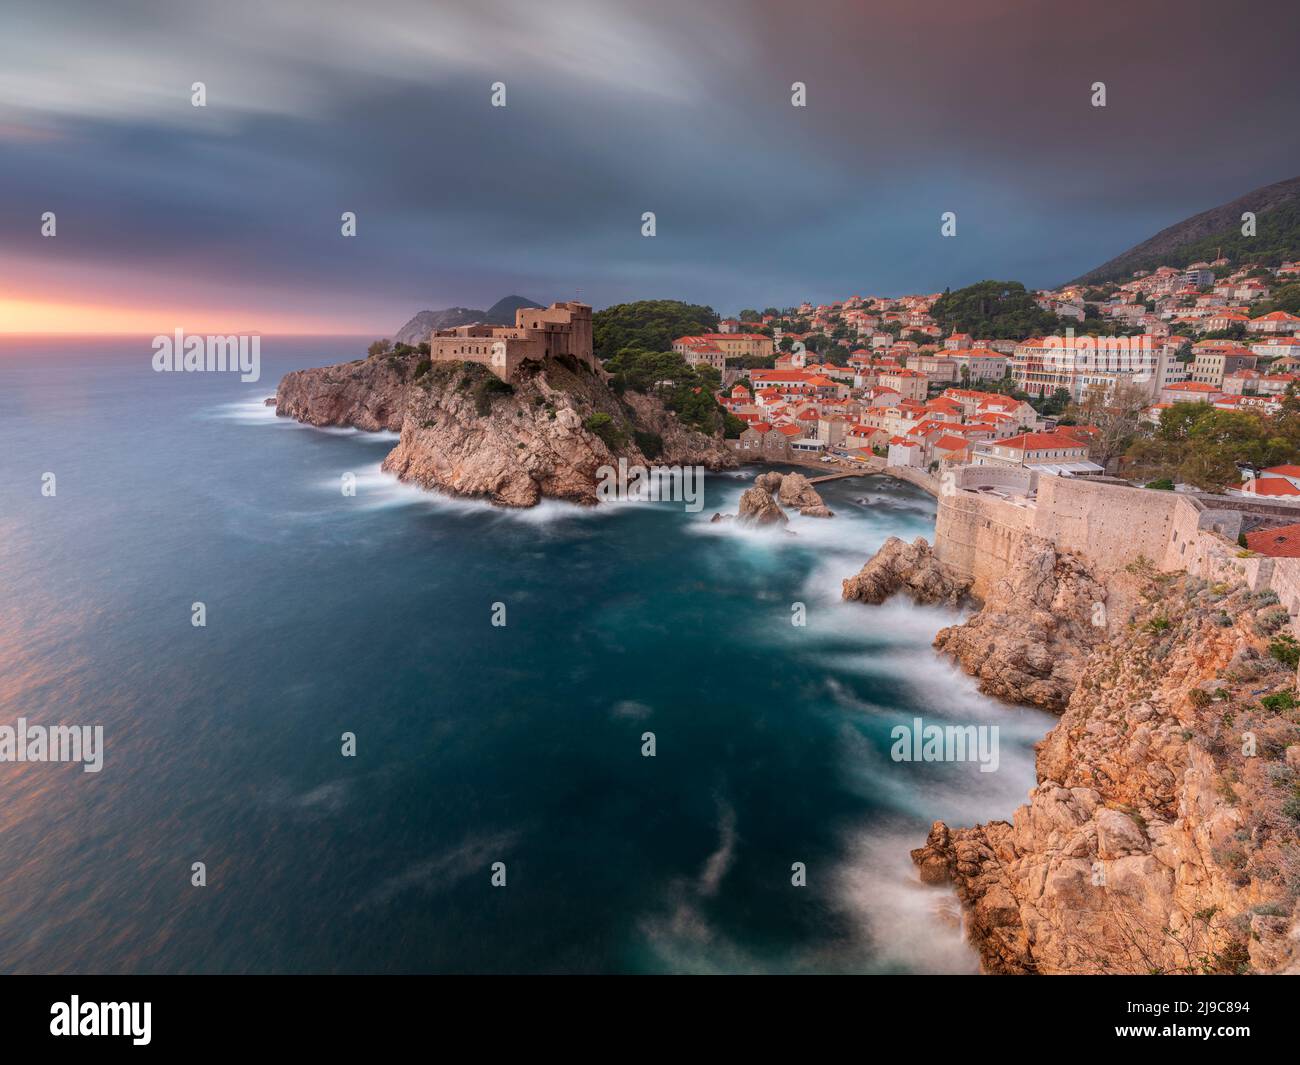 A view over Dubrovnik from the city wall at sunset. Stock Photo